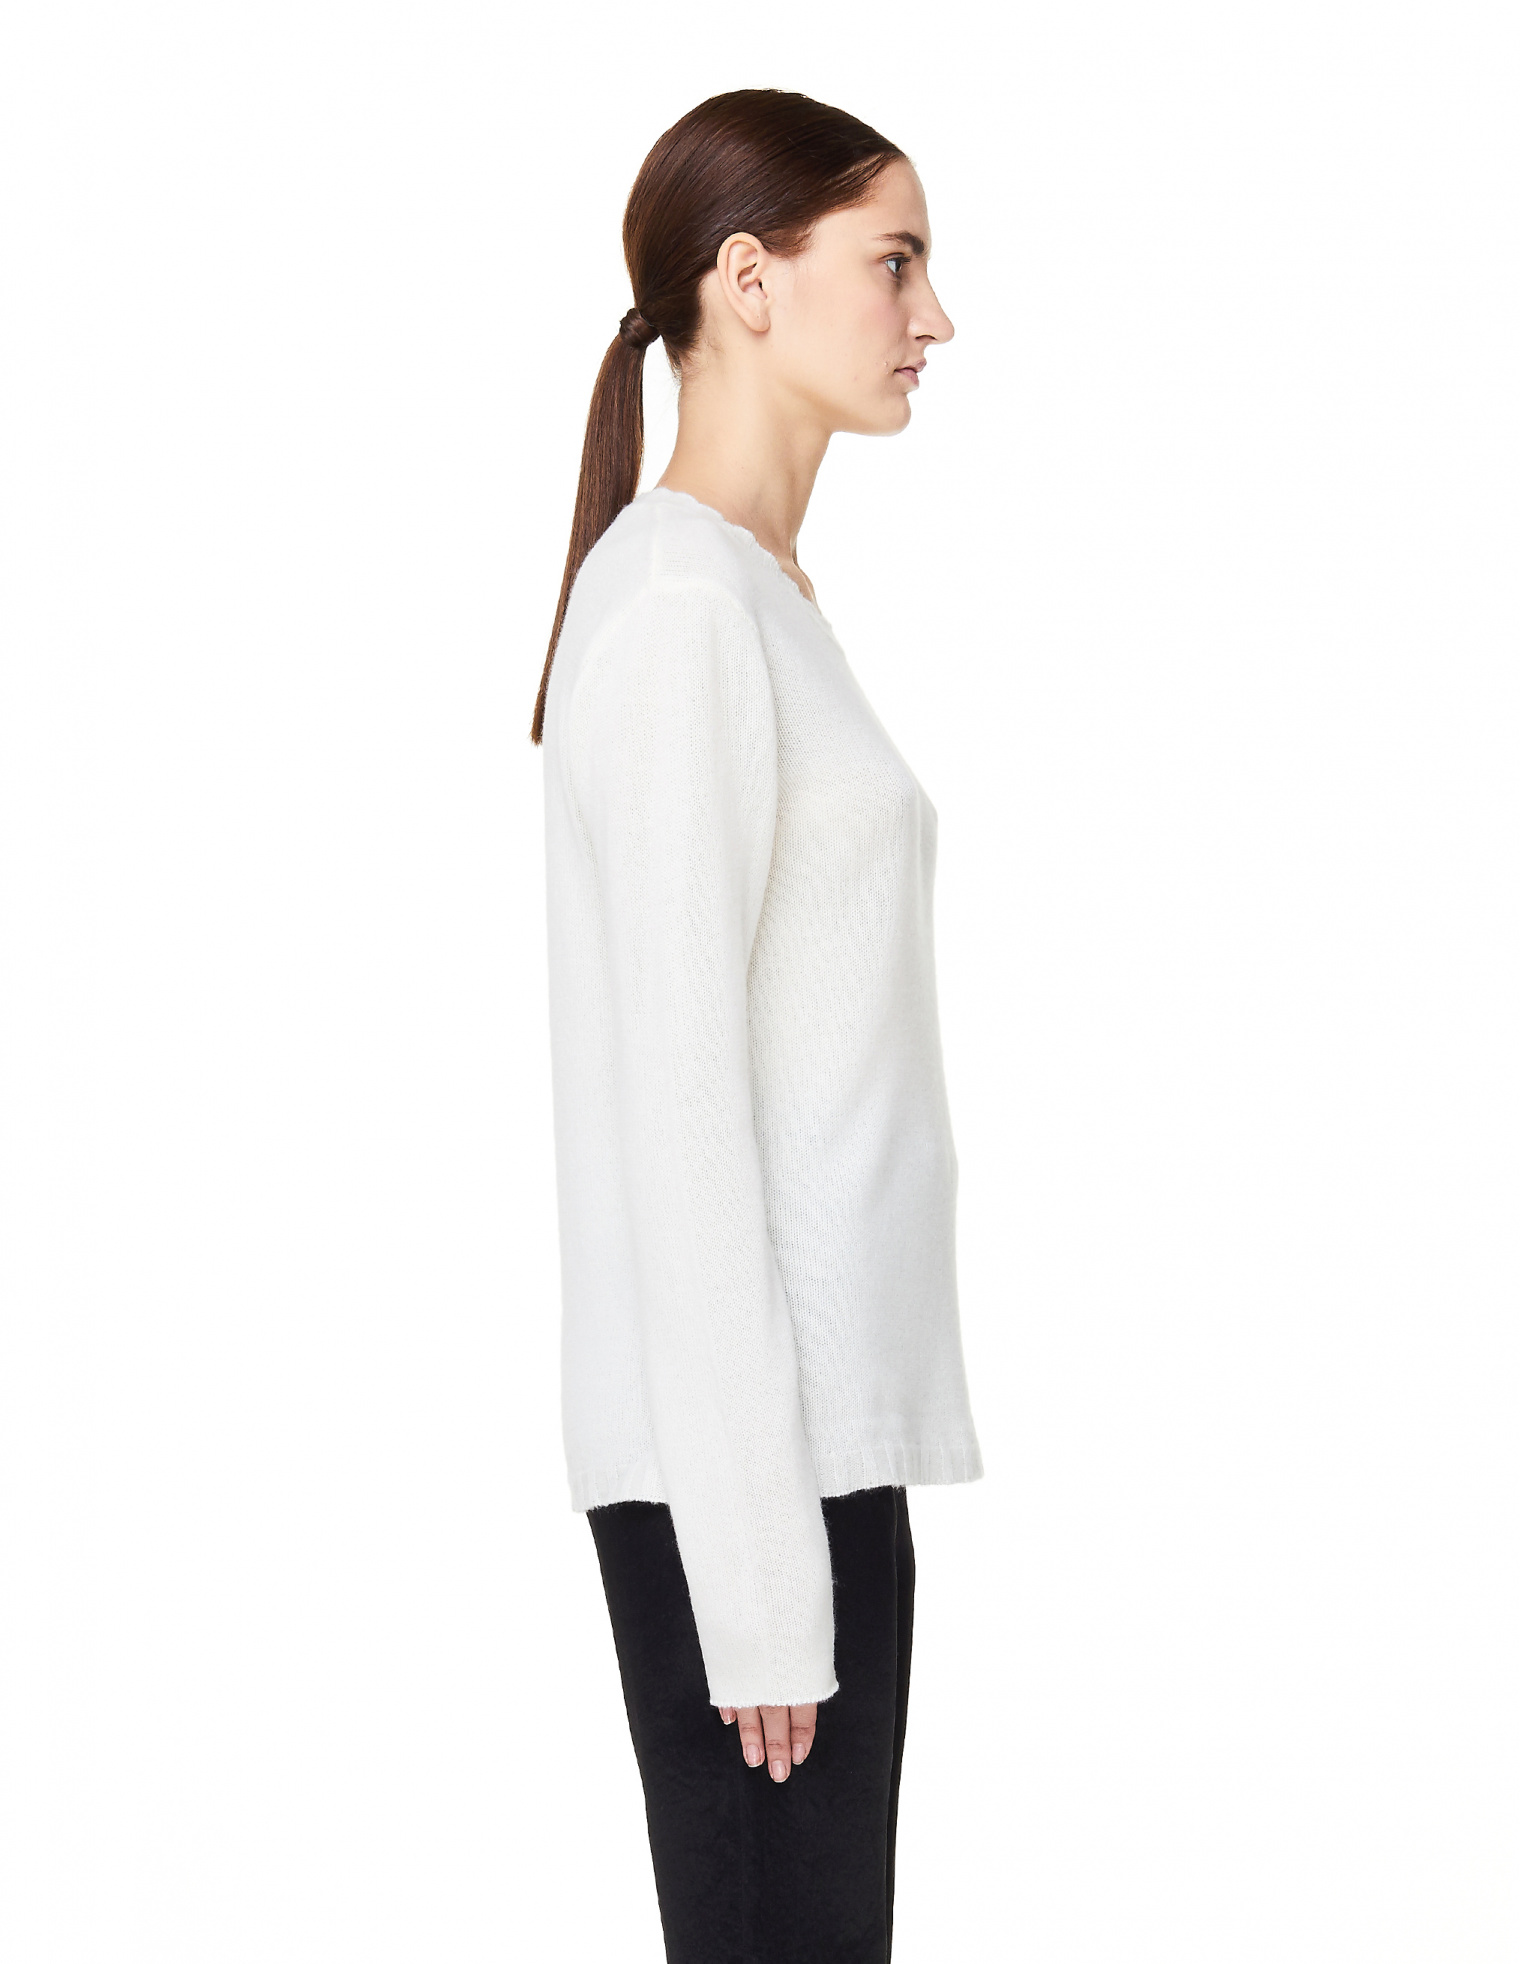 James Perse Ivory Cashmere Sweater